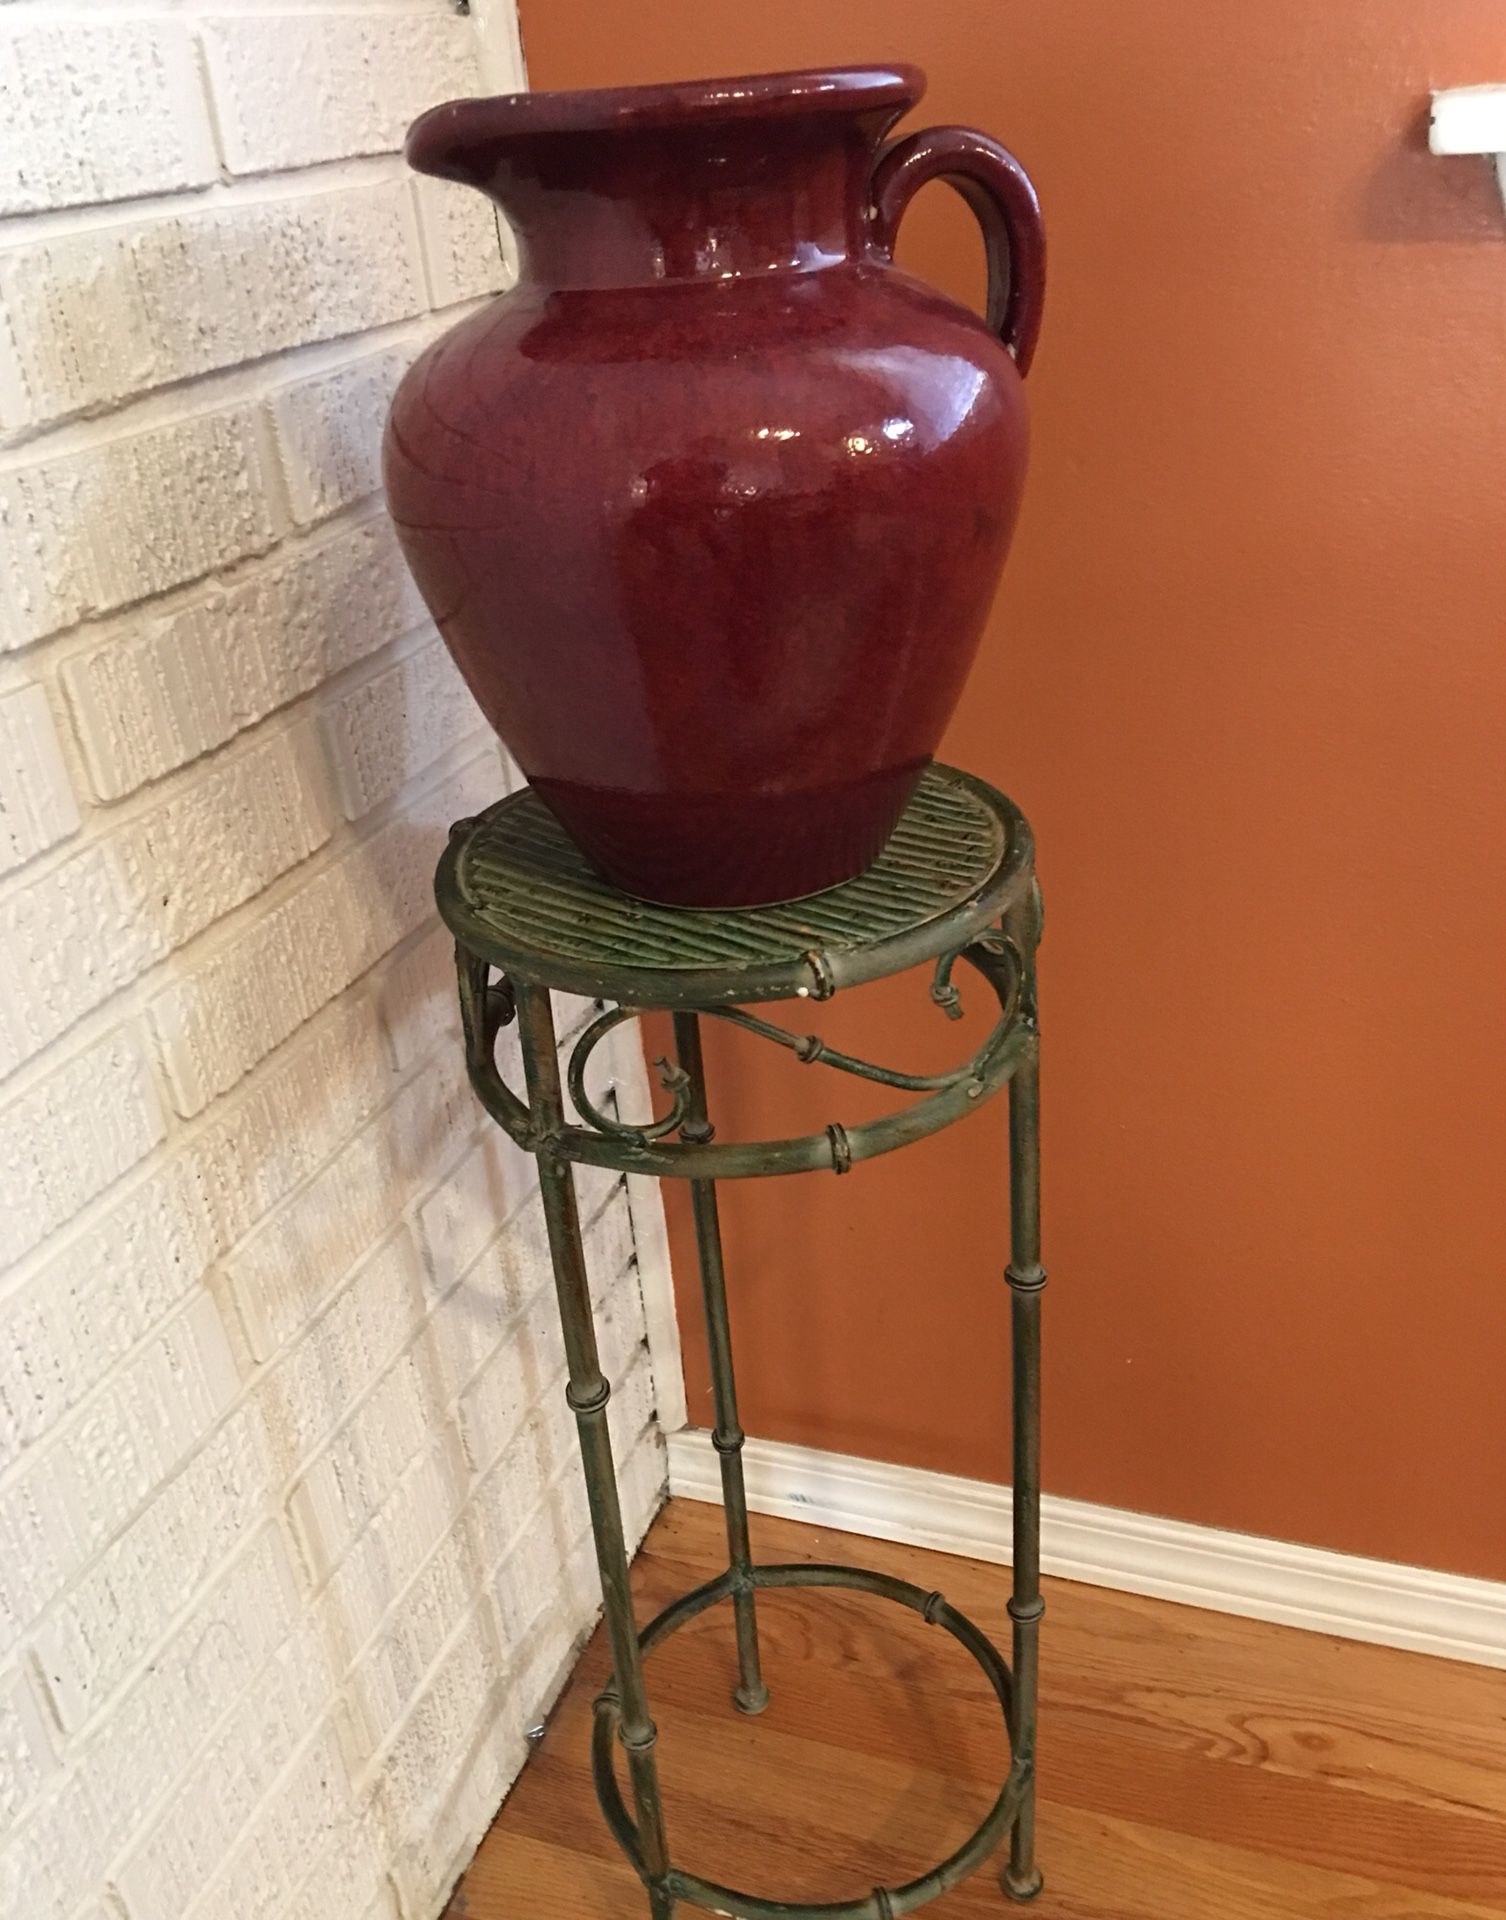 Flower Vase with a Stand